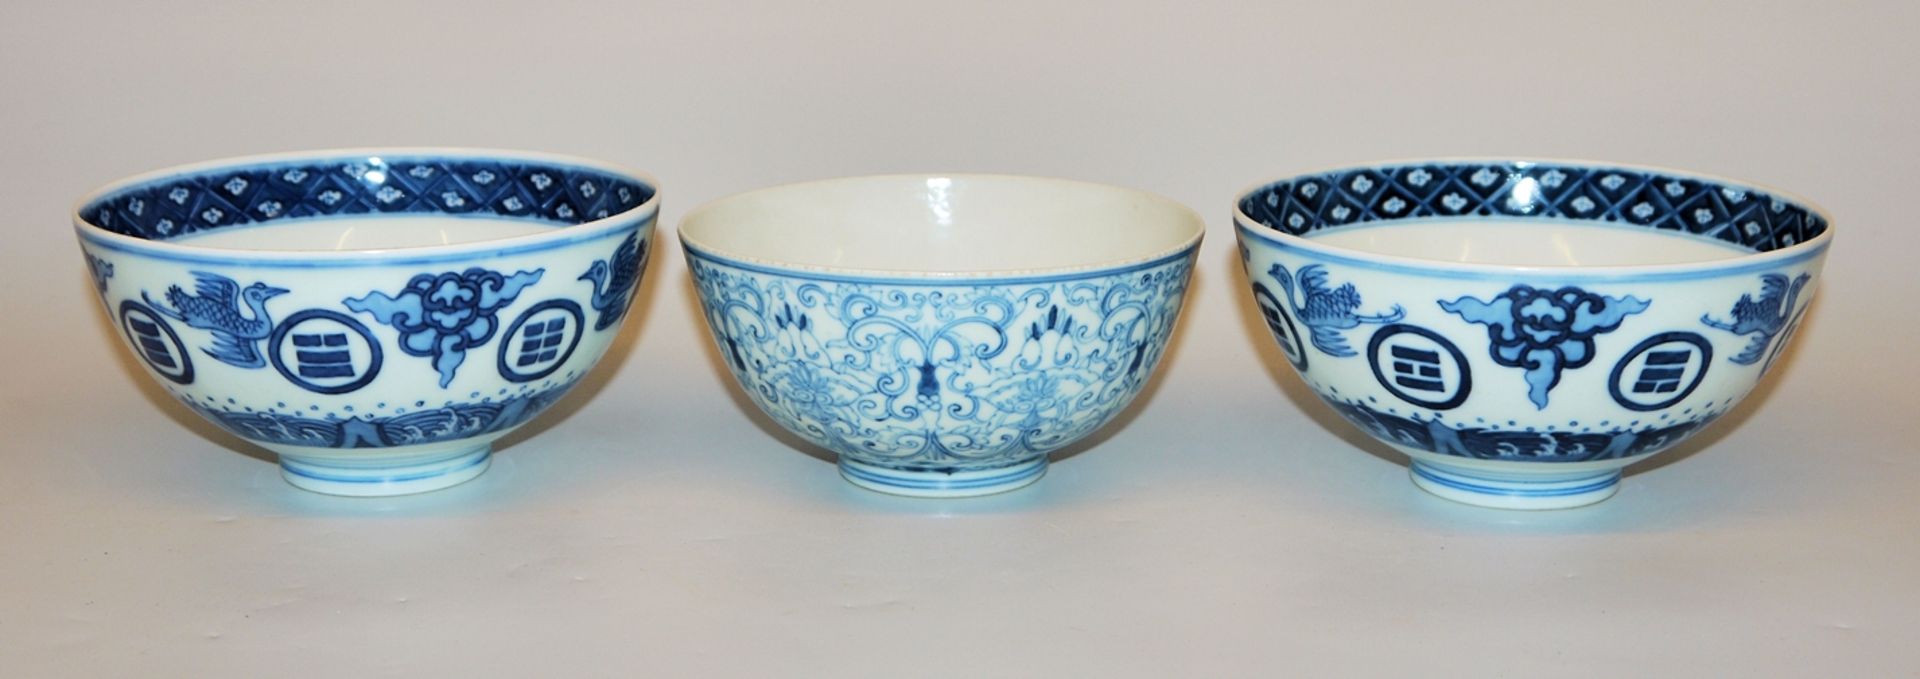 Three Blue and White Dining Bowls, late Qing/Republic period, China, circa 1900